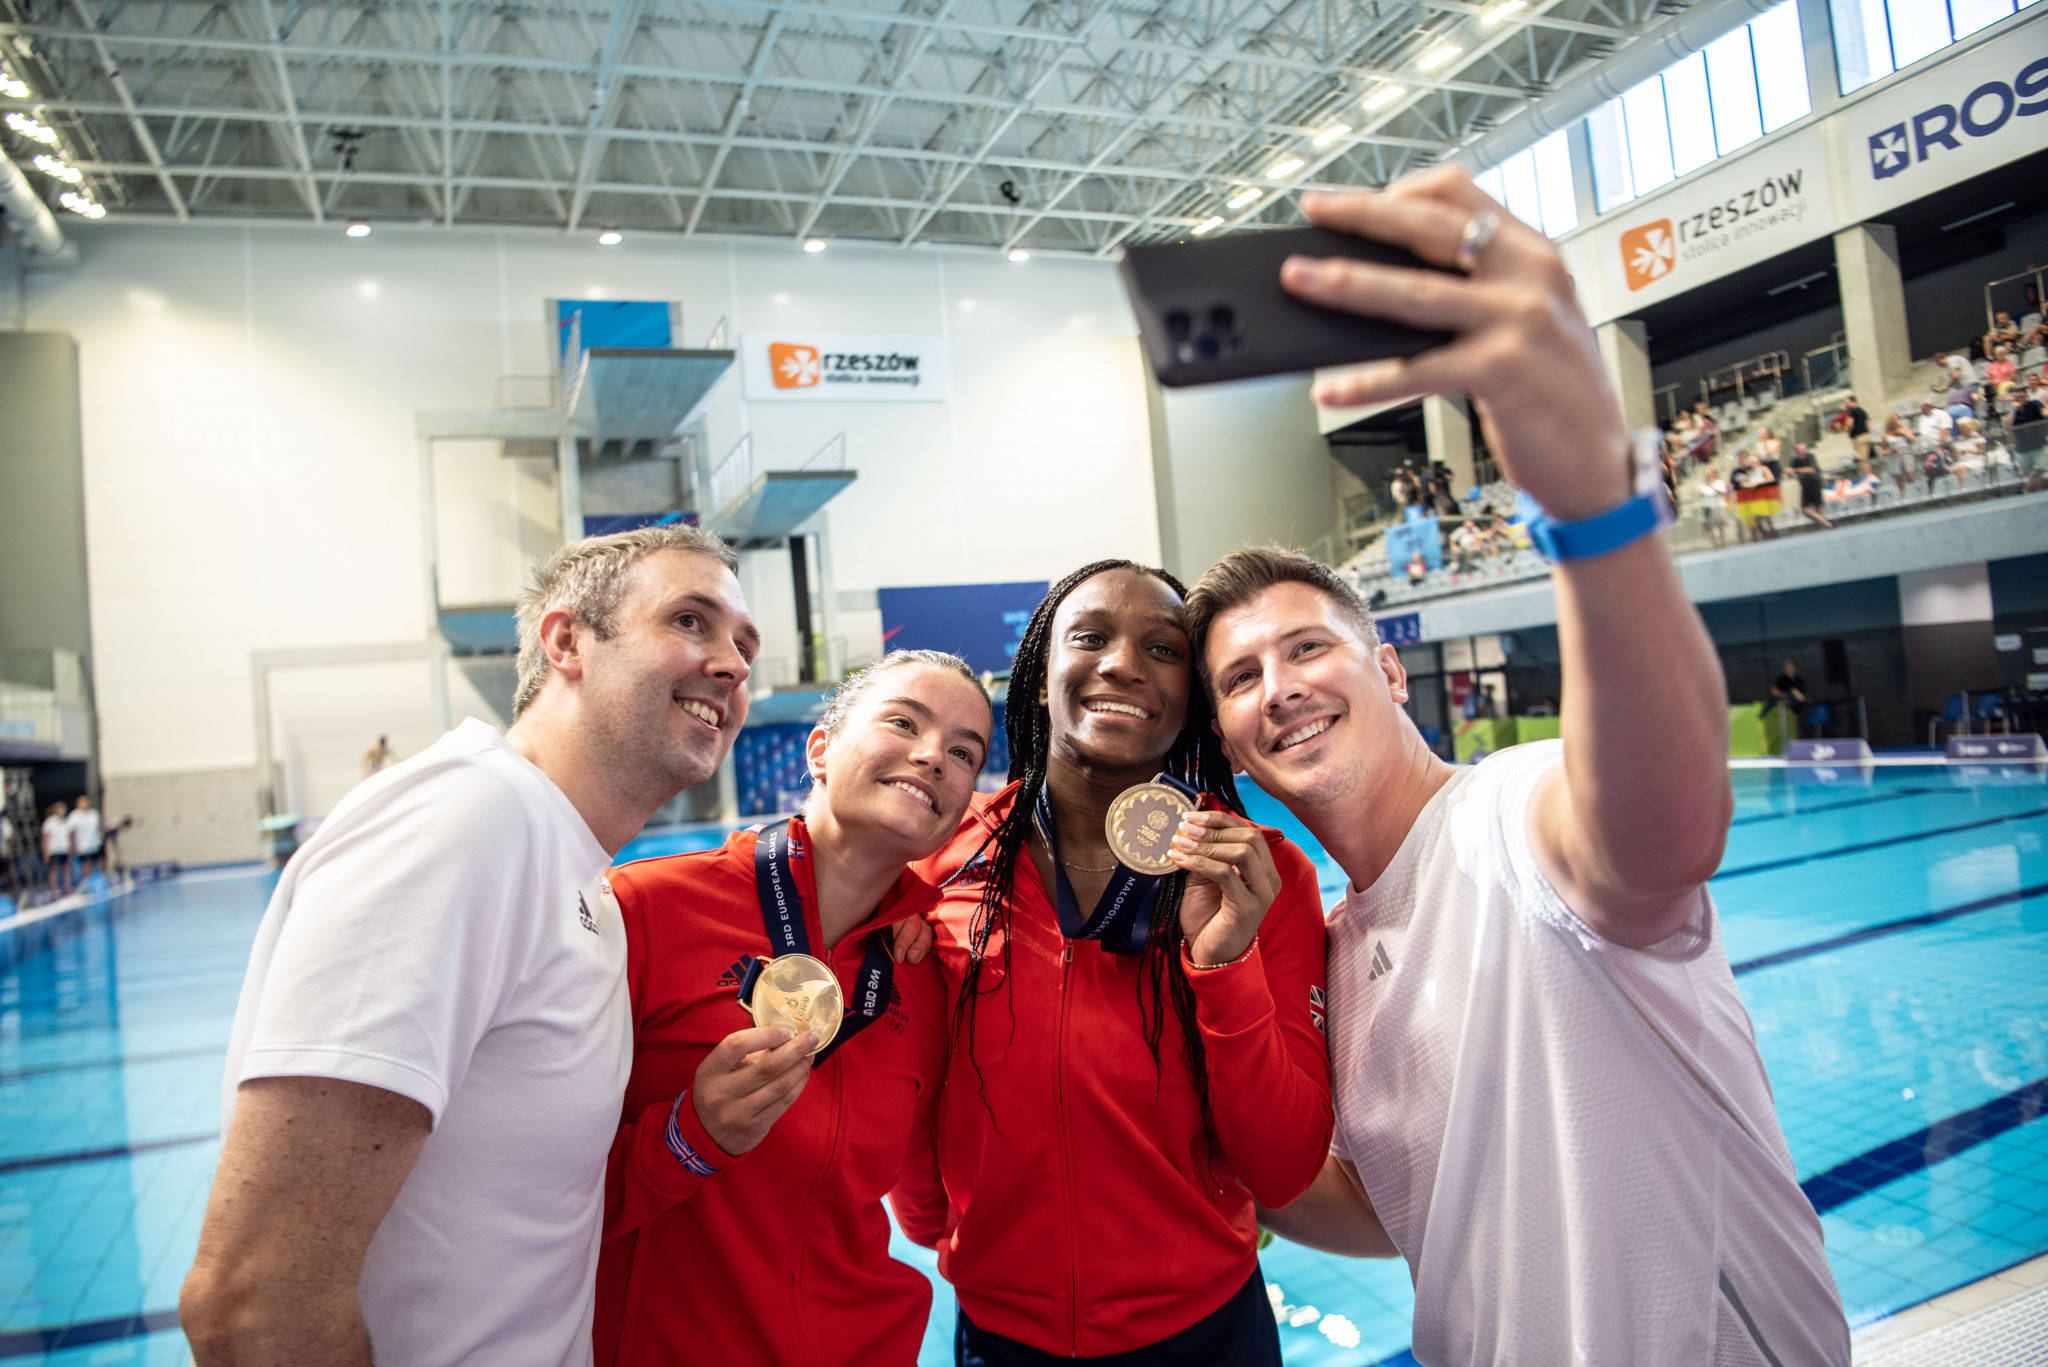 Amy Rollinson, second left, and Desharne Bent-Ashmeil, second right, won the women's 3m synchronised springboard diving event ©Kraków-Małopolska 2023